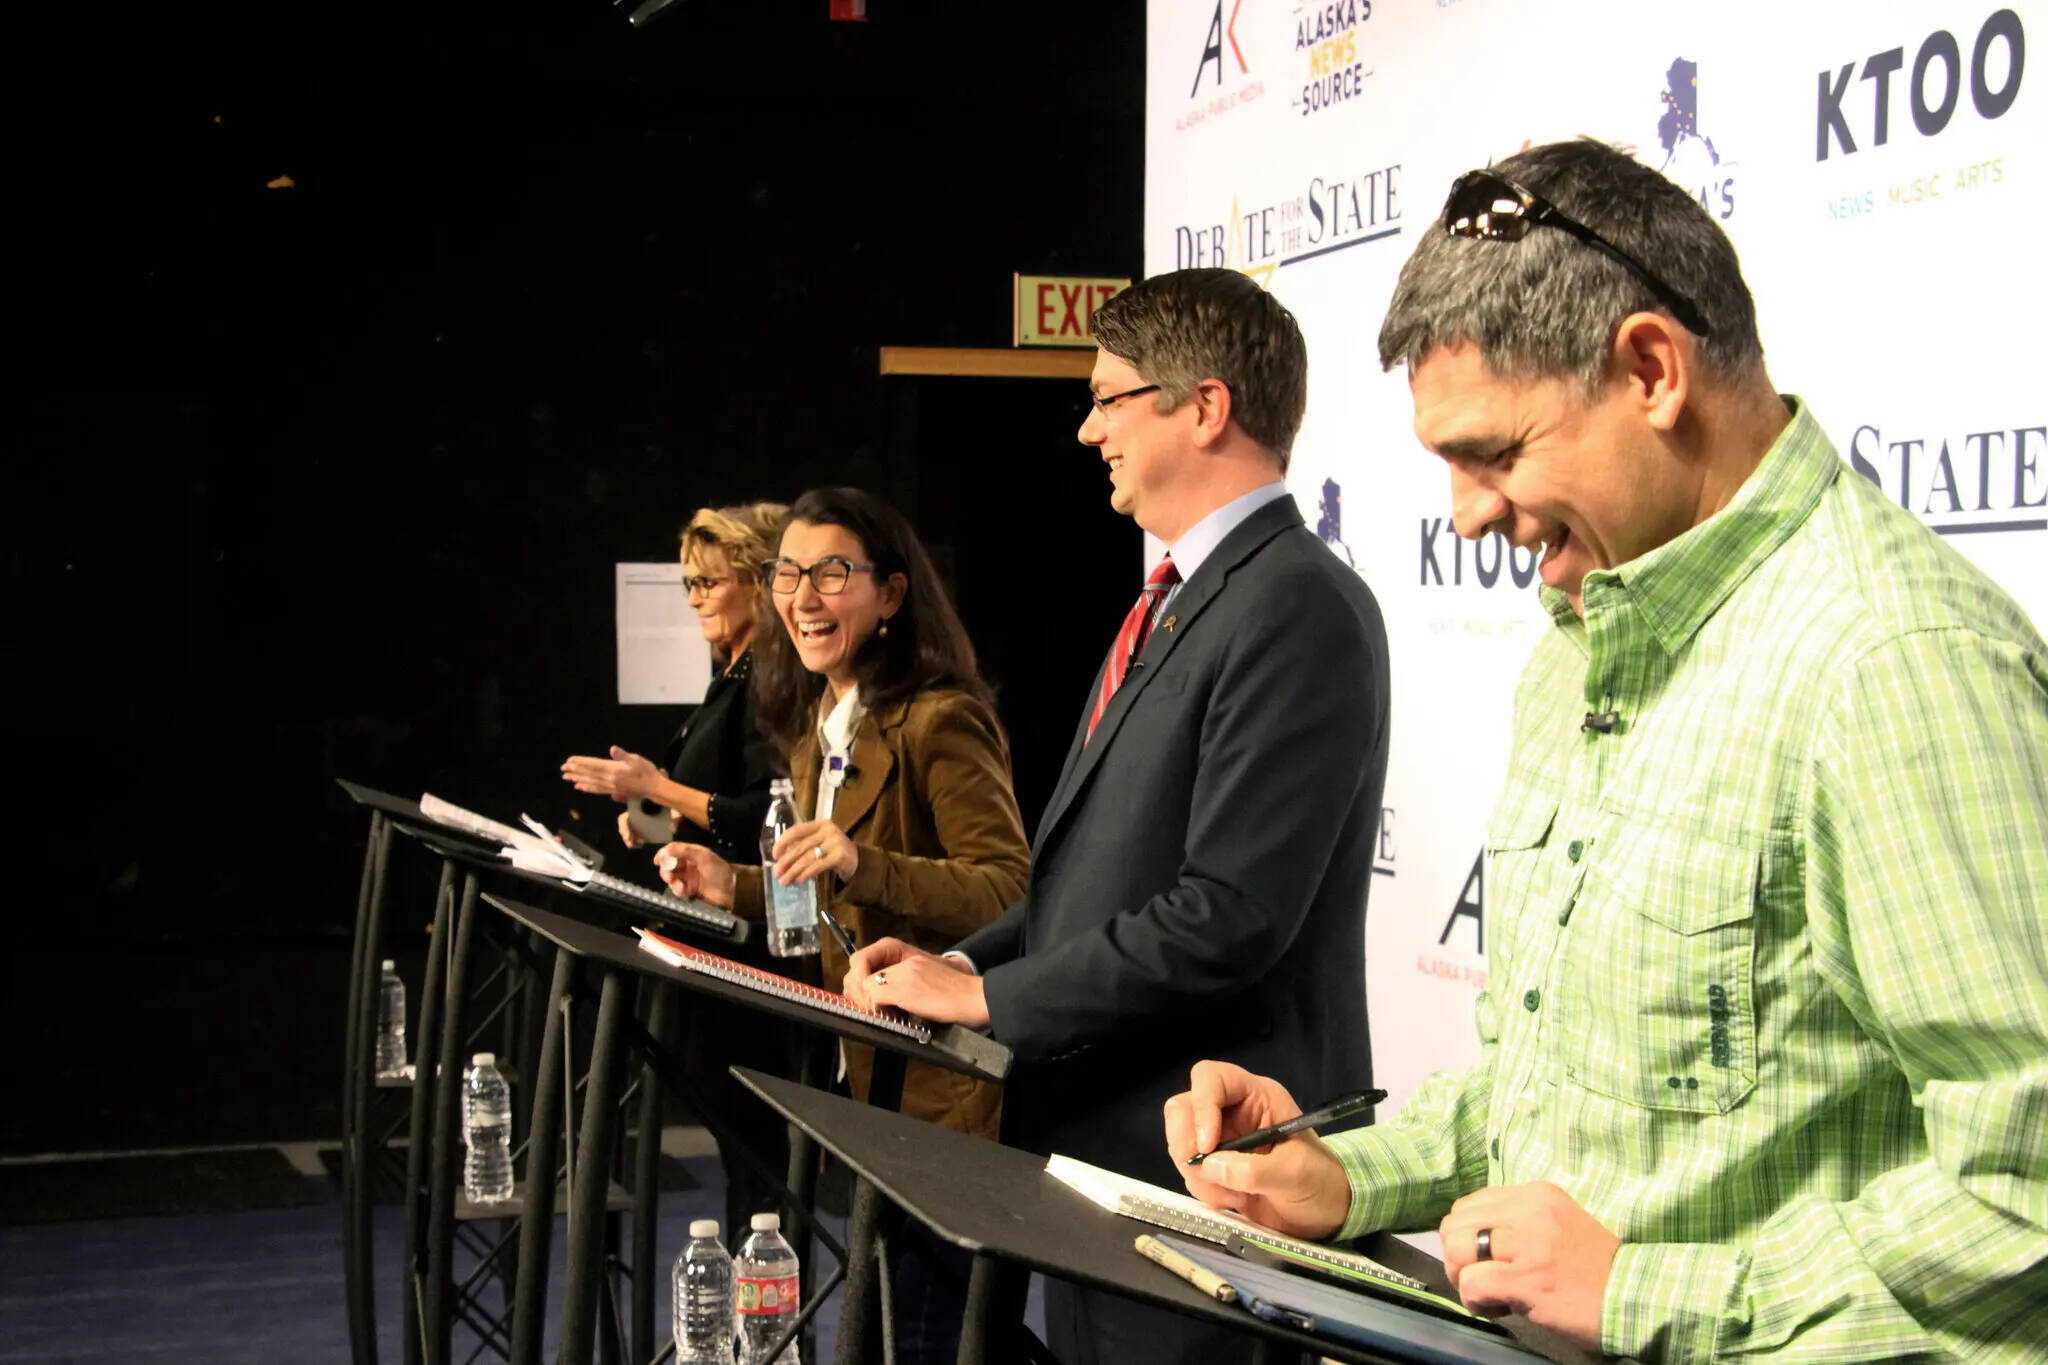 From left, onstage on Wednesday in Anchorage for a debate in Alaska’s U.S. House race: former Gov. Sarah Palin, Rep. Mary Peltola, Nick Begich III and Chris Bye. (Mark Thiessen/Associated Press)